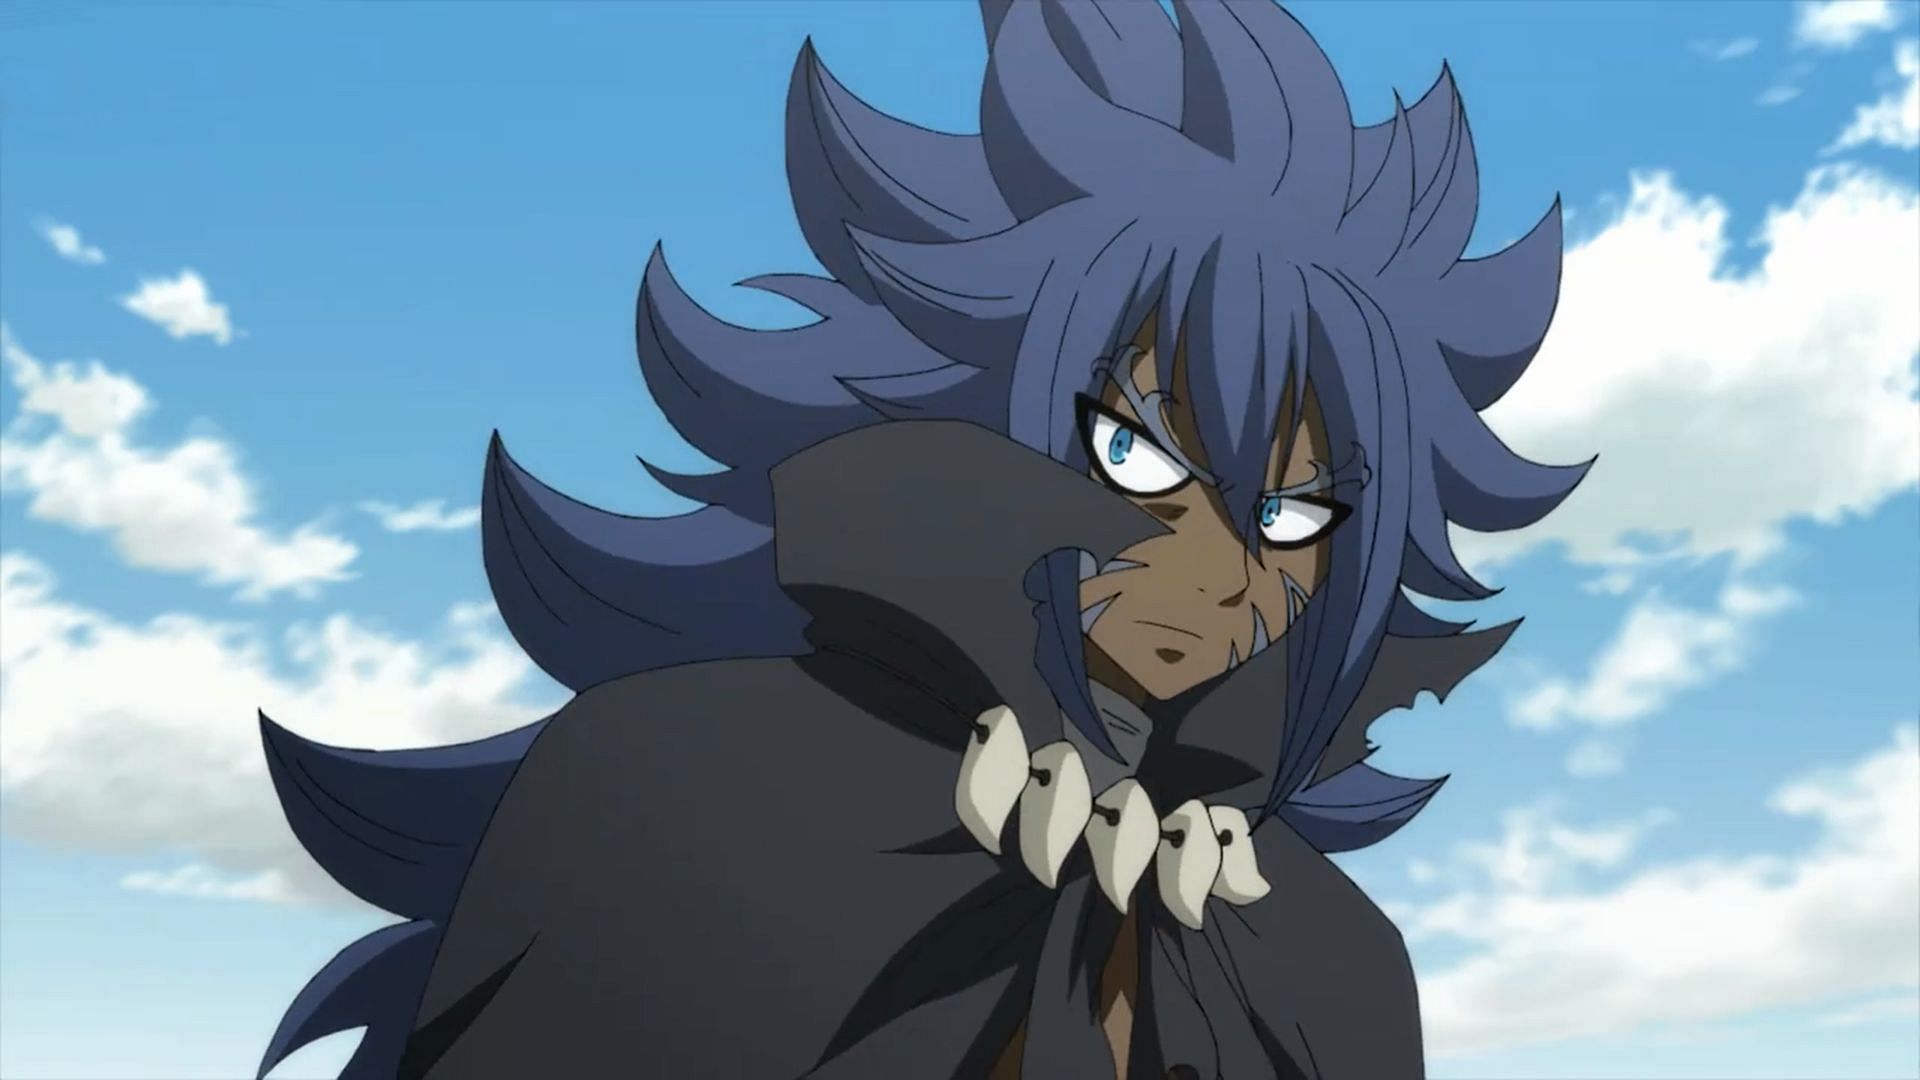 Chapter 162 hints Acnologia